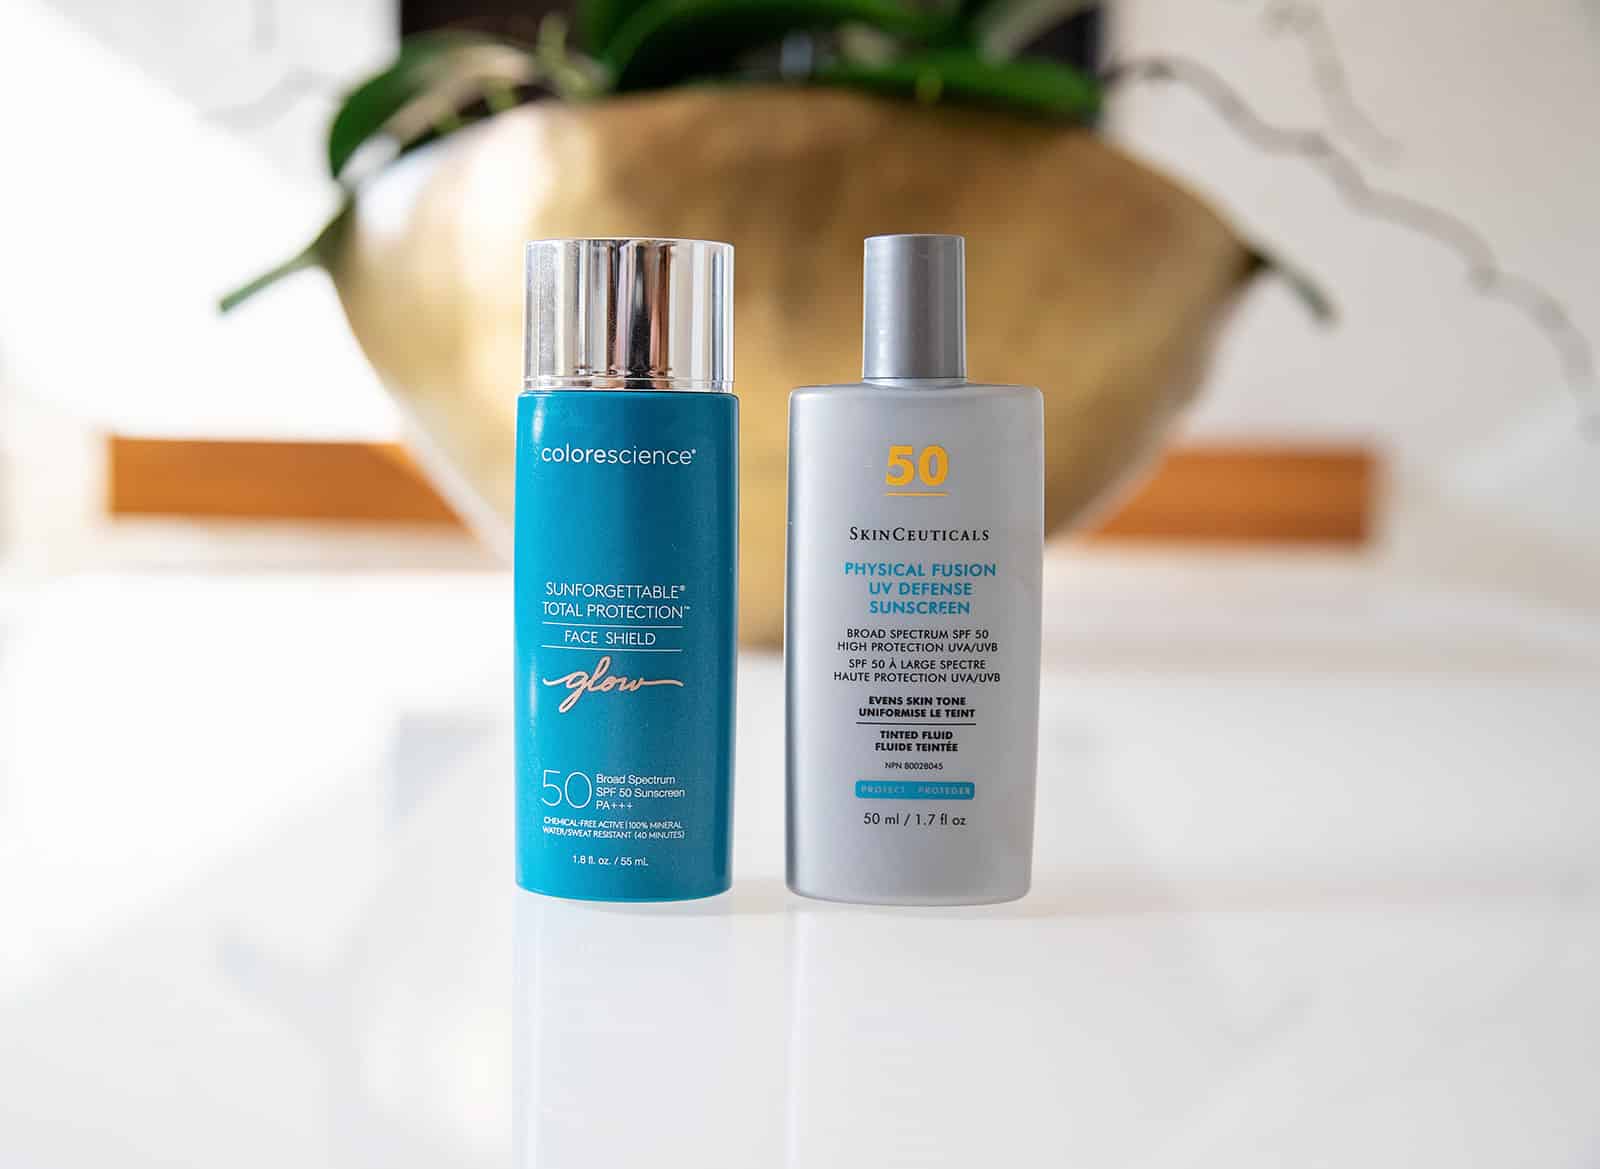 Colorescience Total Protection Face Shield SPF 50 and SkinCeuticals Physical Fusion SPF 50